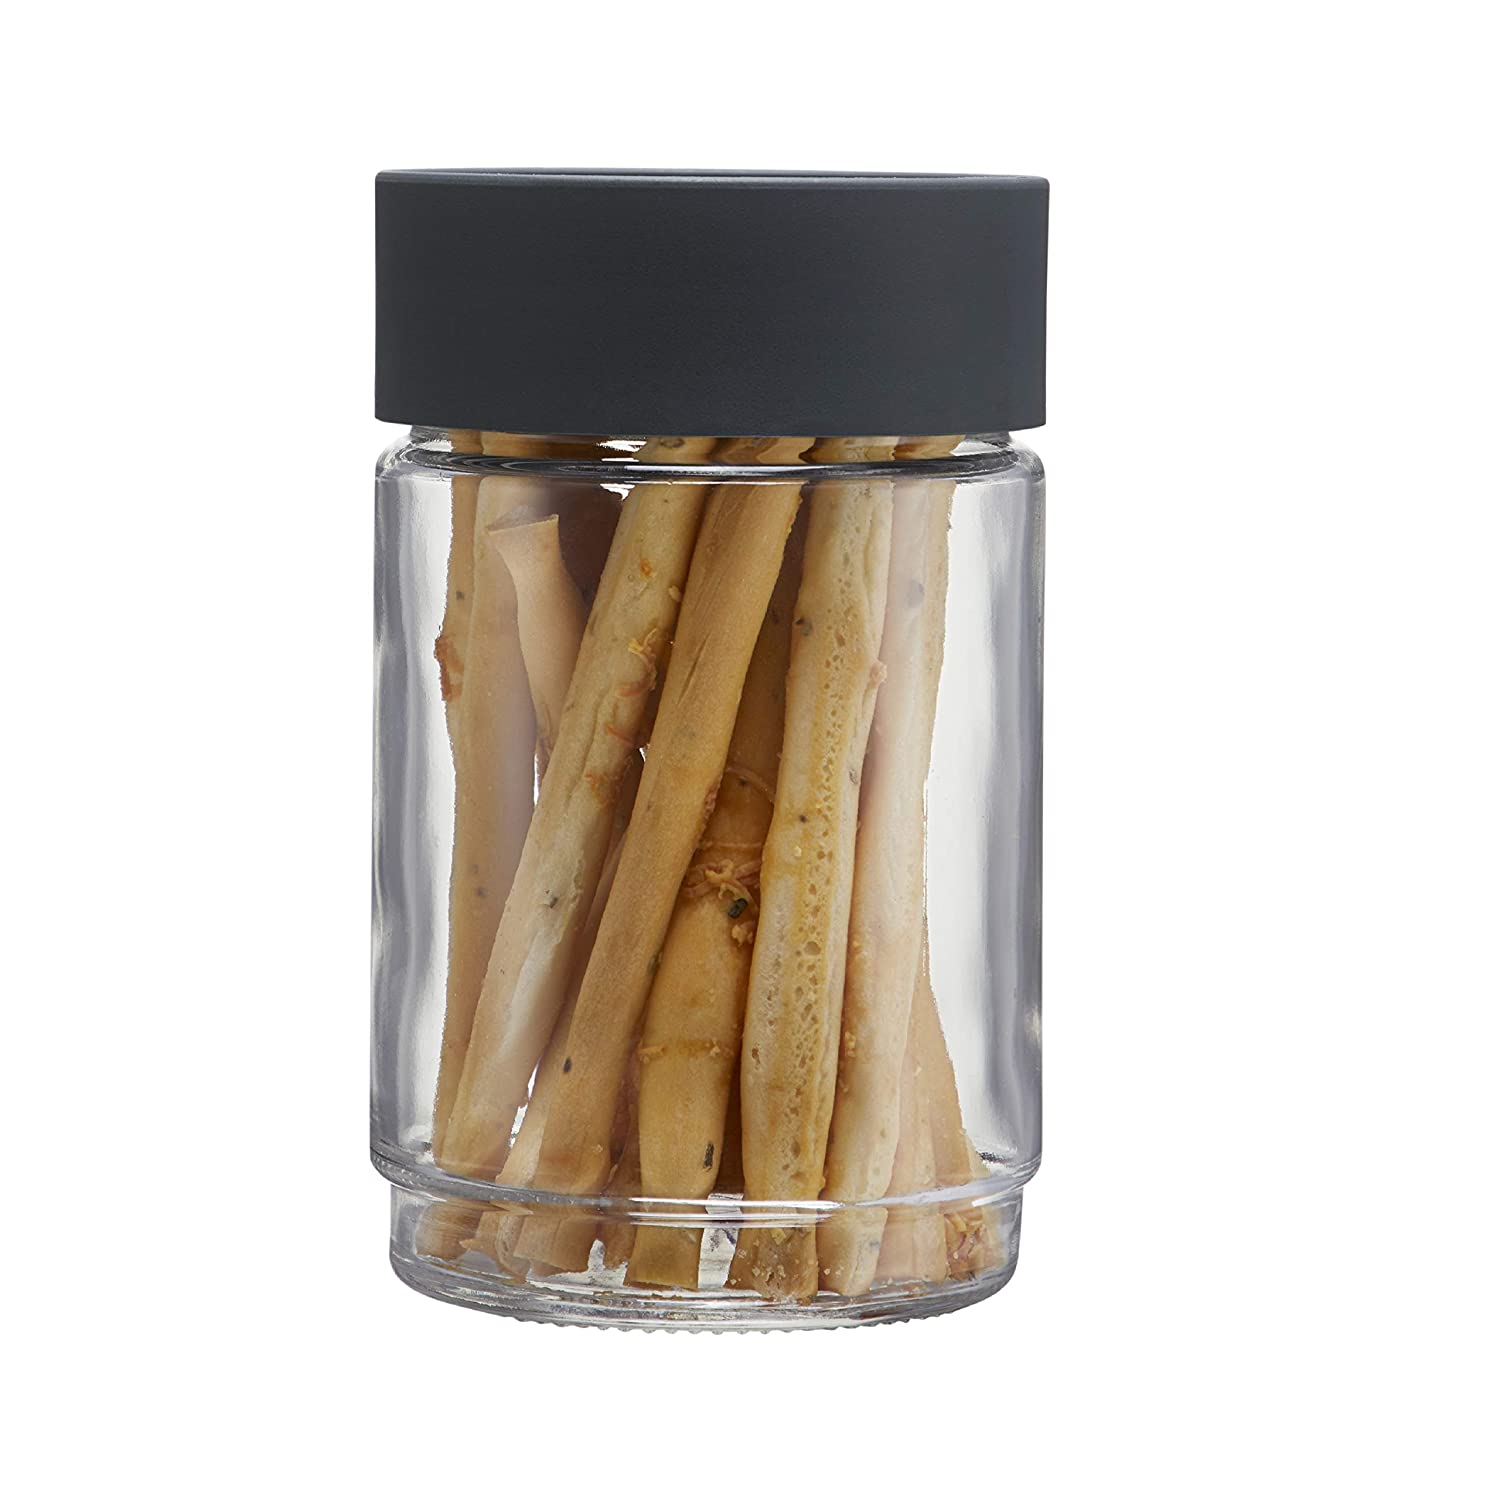 Cello Modustack Glassy Storage Jar, Stackable, Clear, 750ml